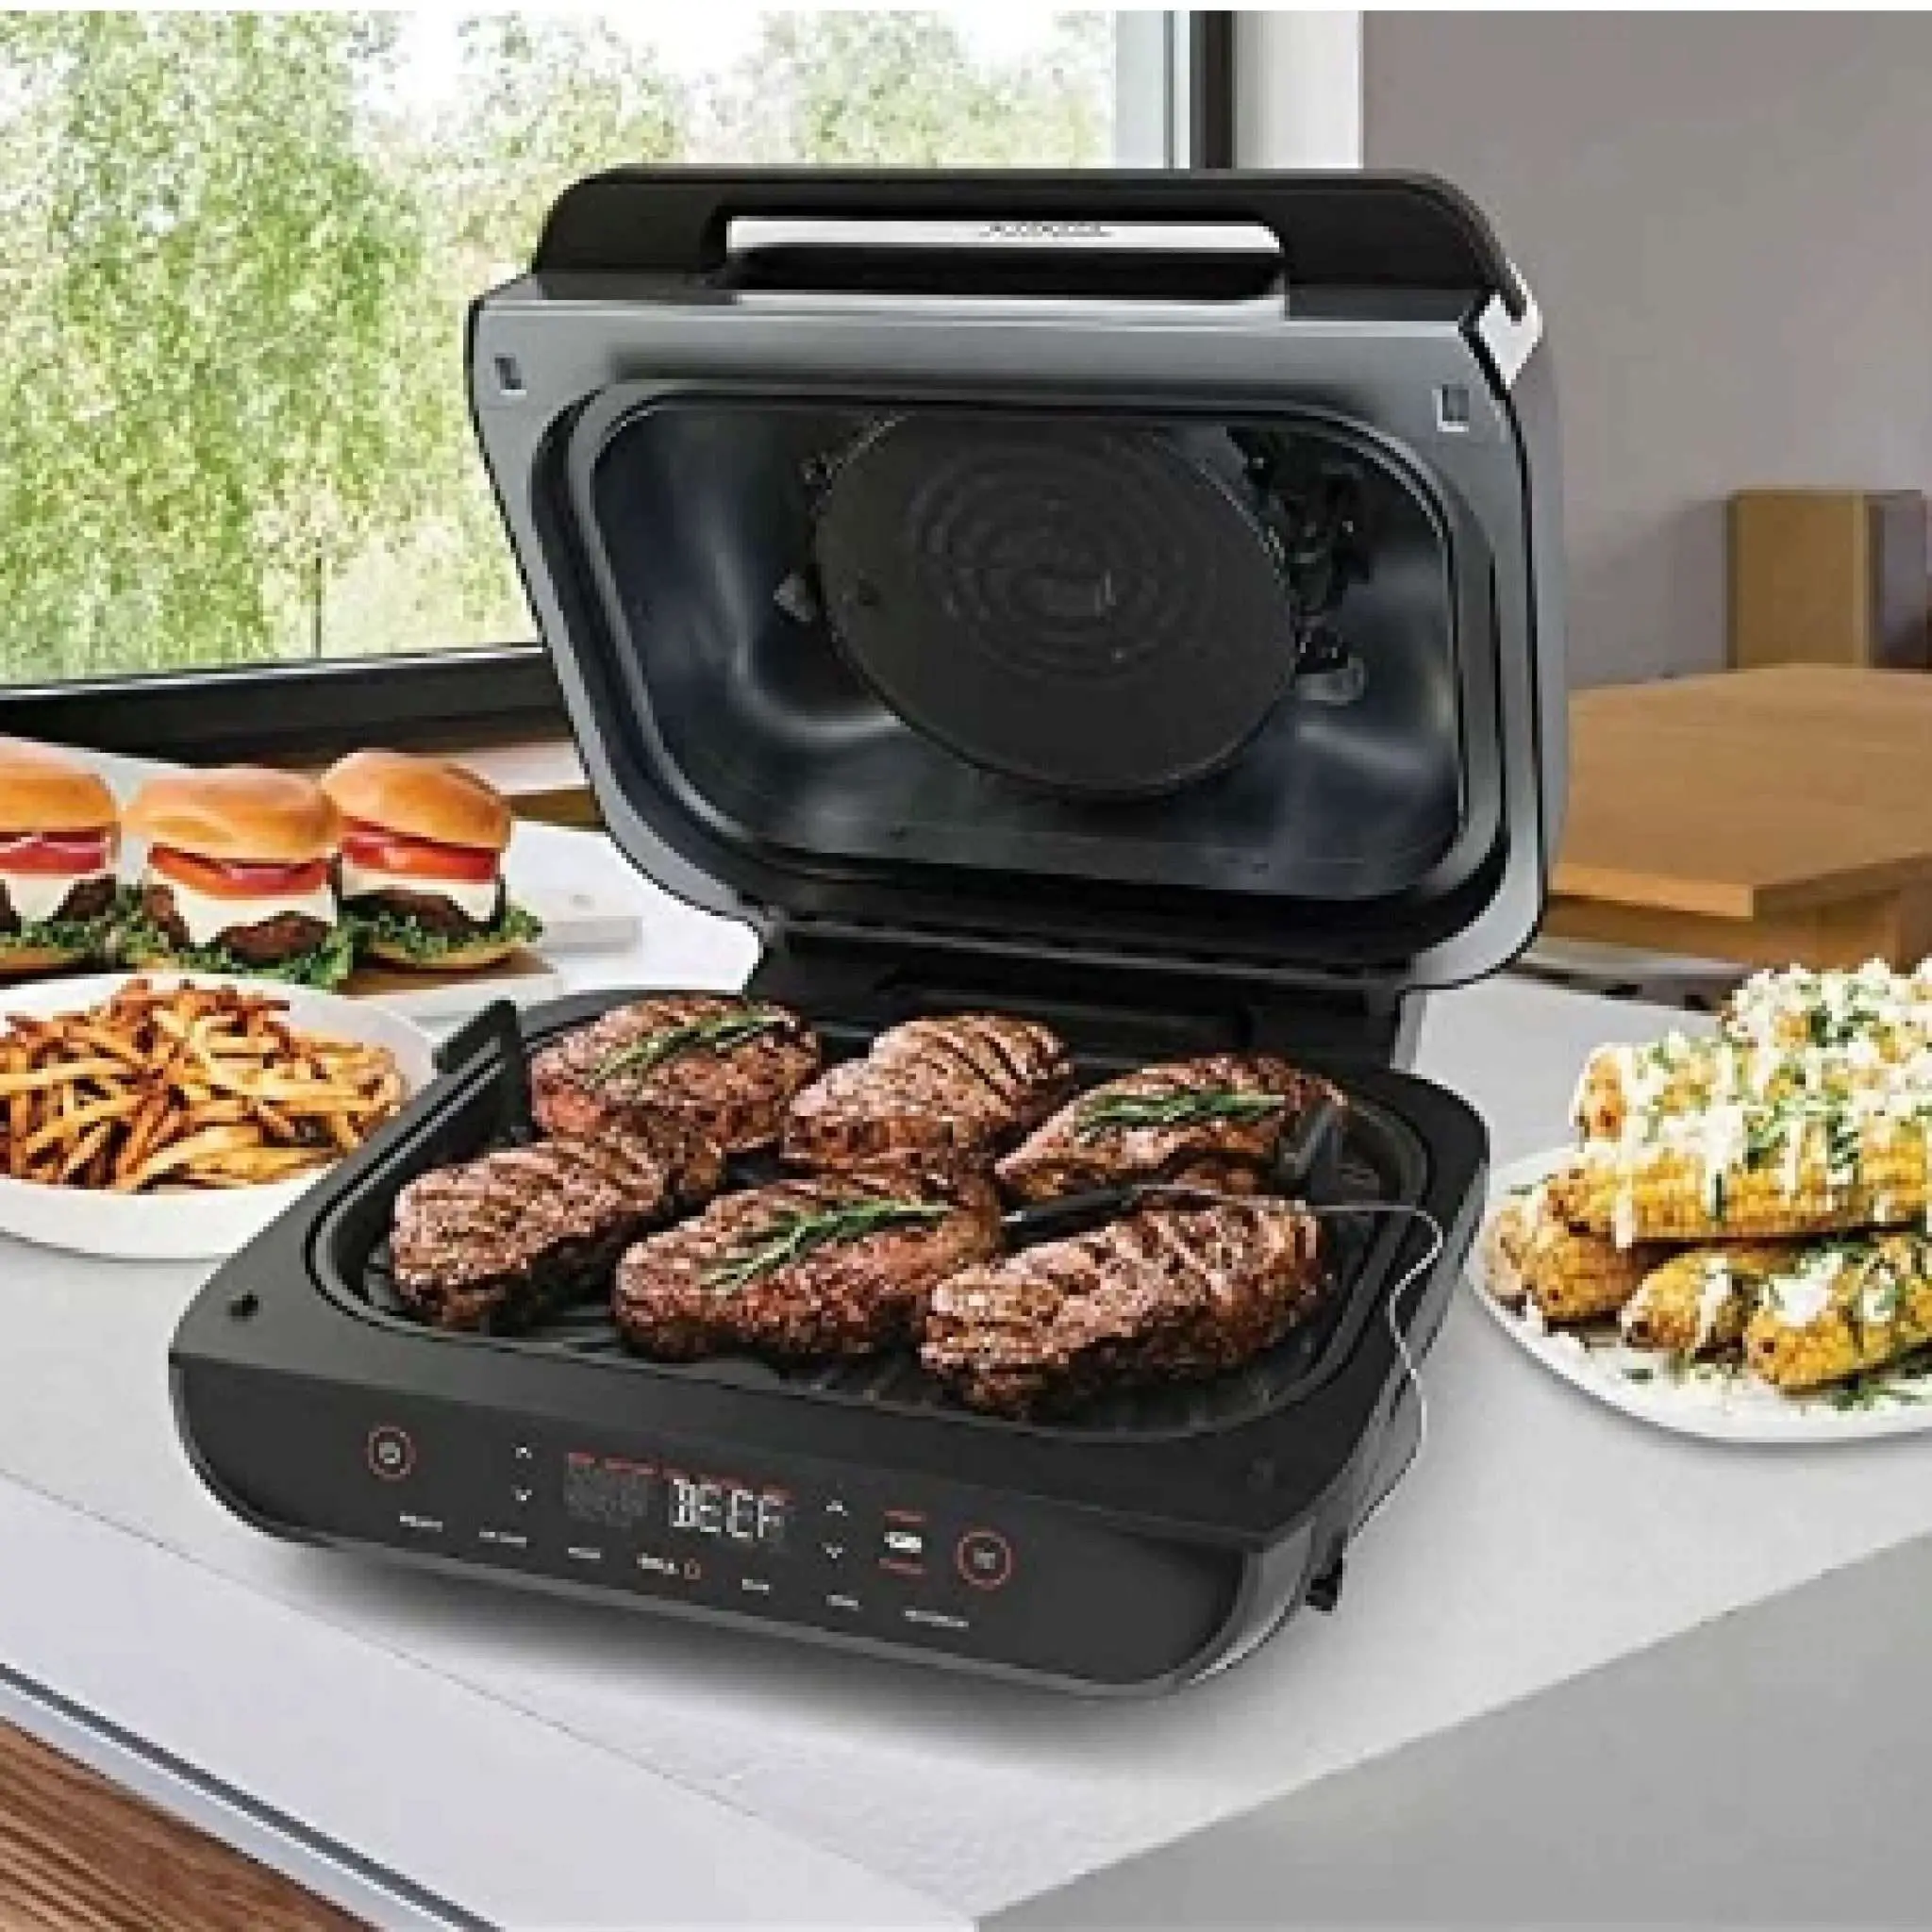 Ninja Foodi Grill Review â The Best Indoor Electric Grill for 2021